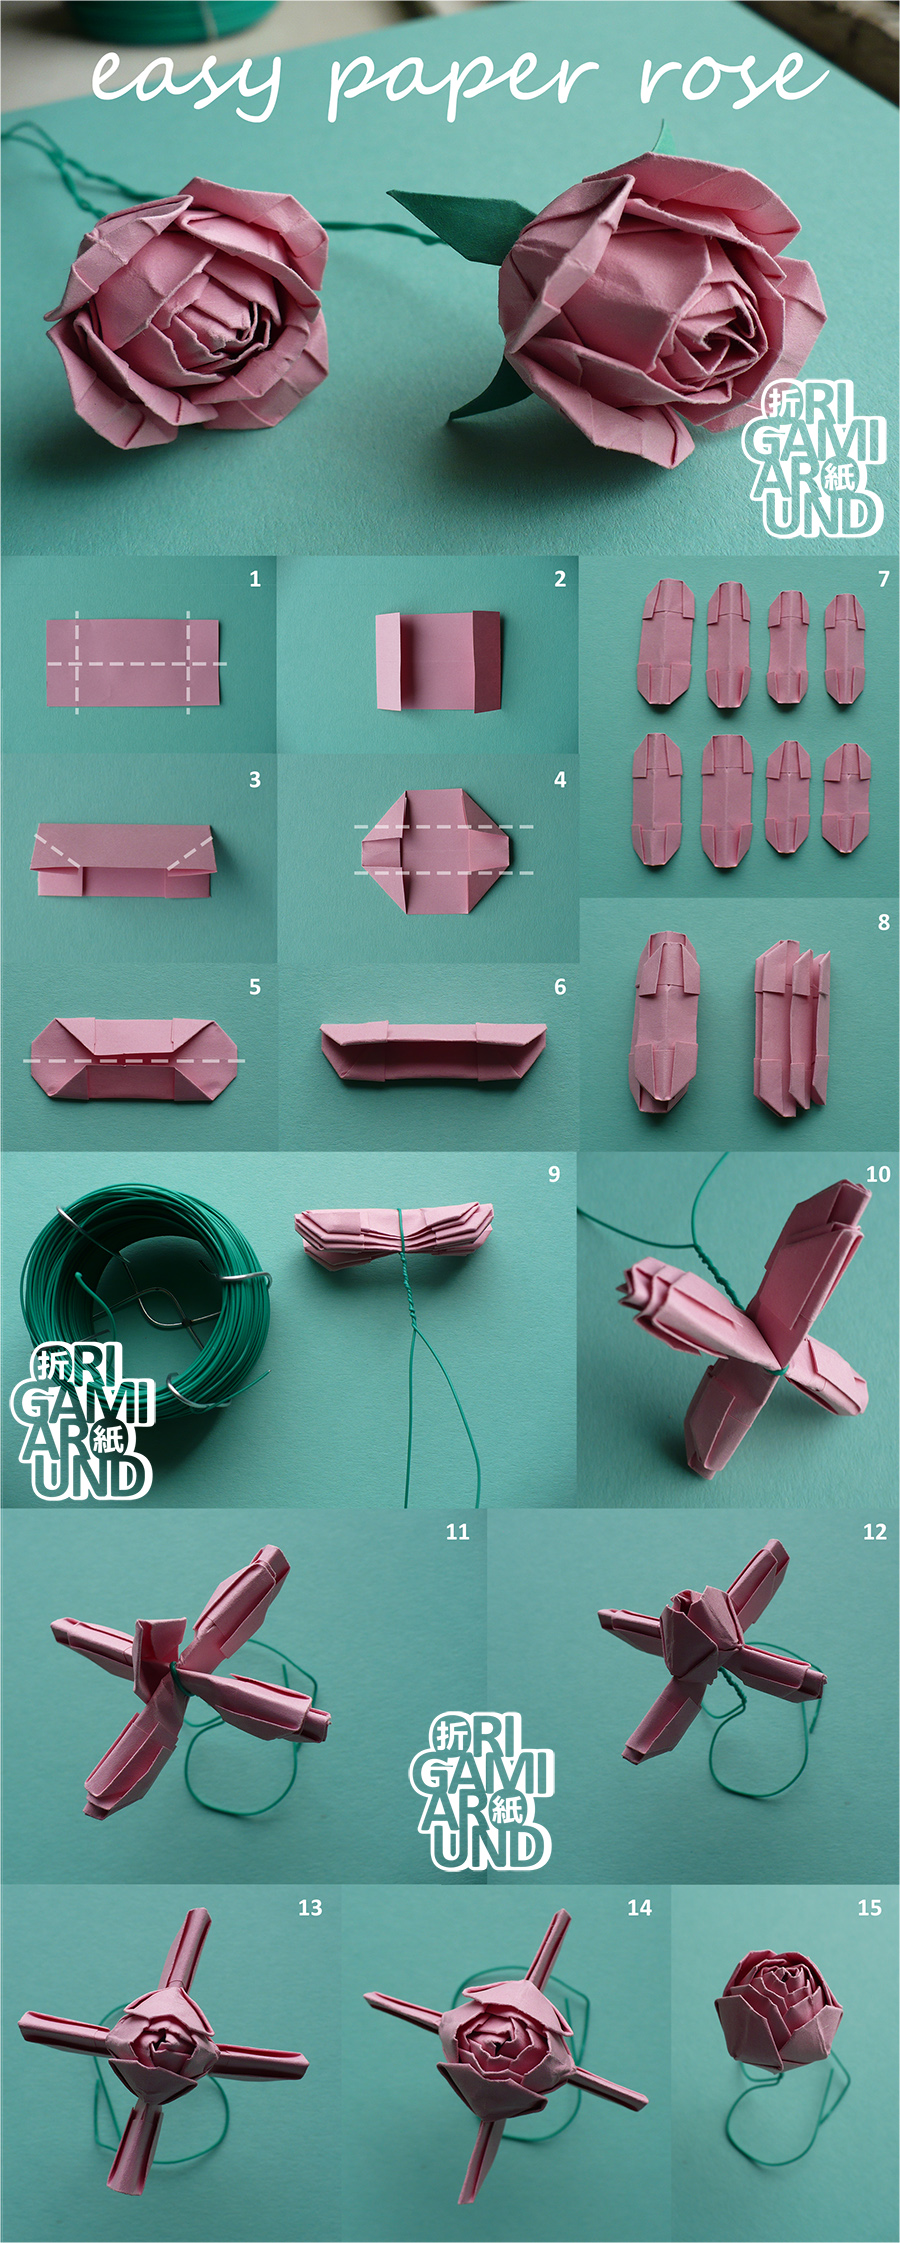 Easy Paper Rose Tutorial by OrigamiAround on DeviantArt